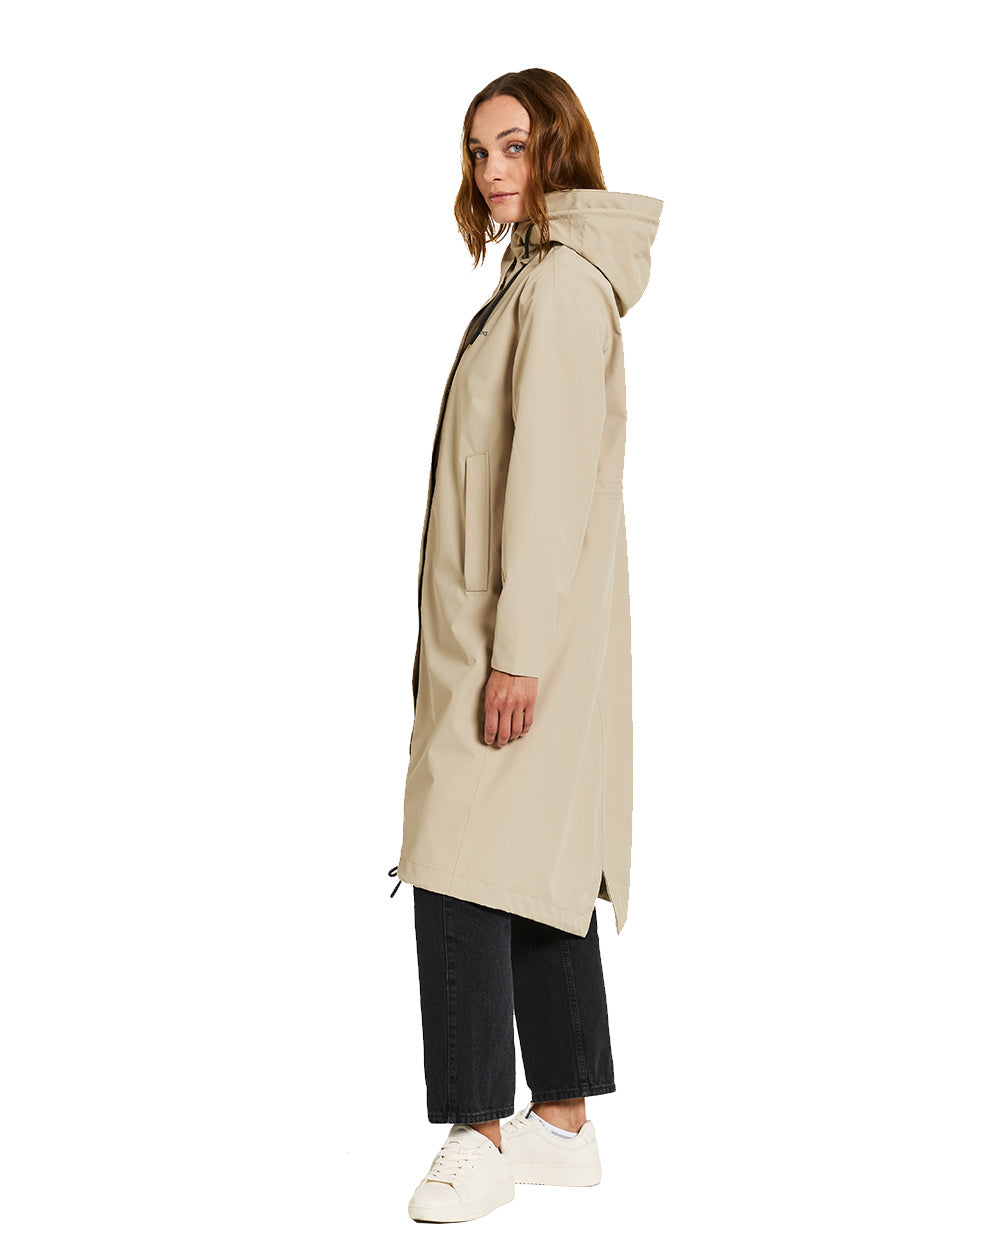 Clay Beige Coloured Didriksons Alice Womens Parka Long 2 On A White Background 